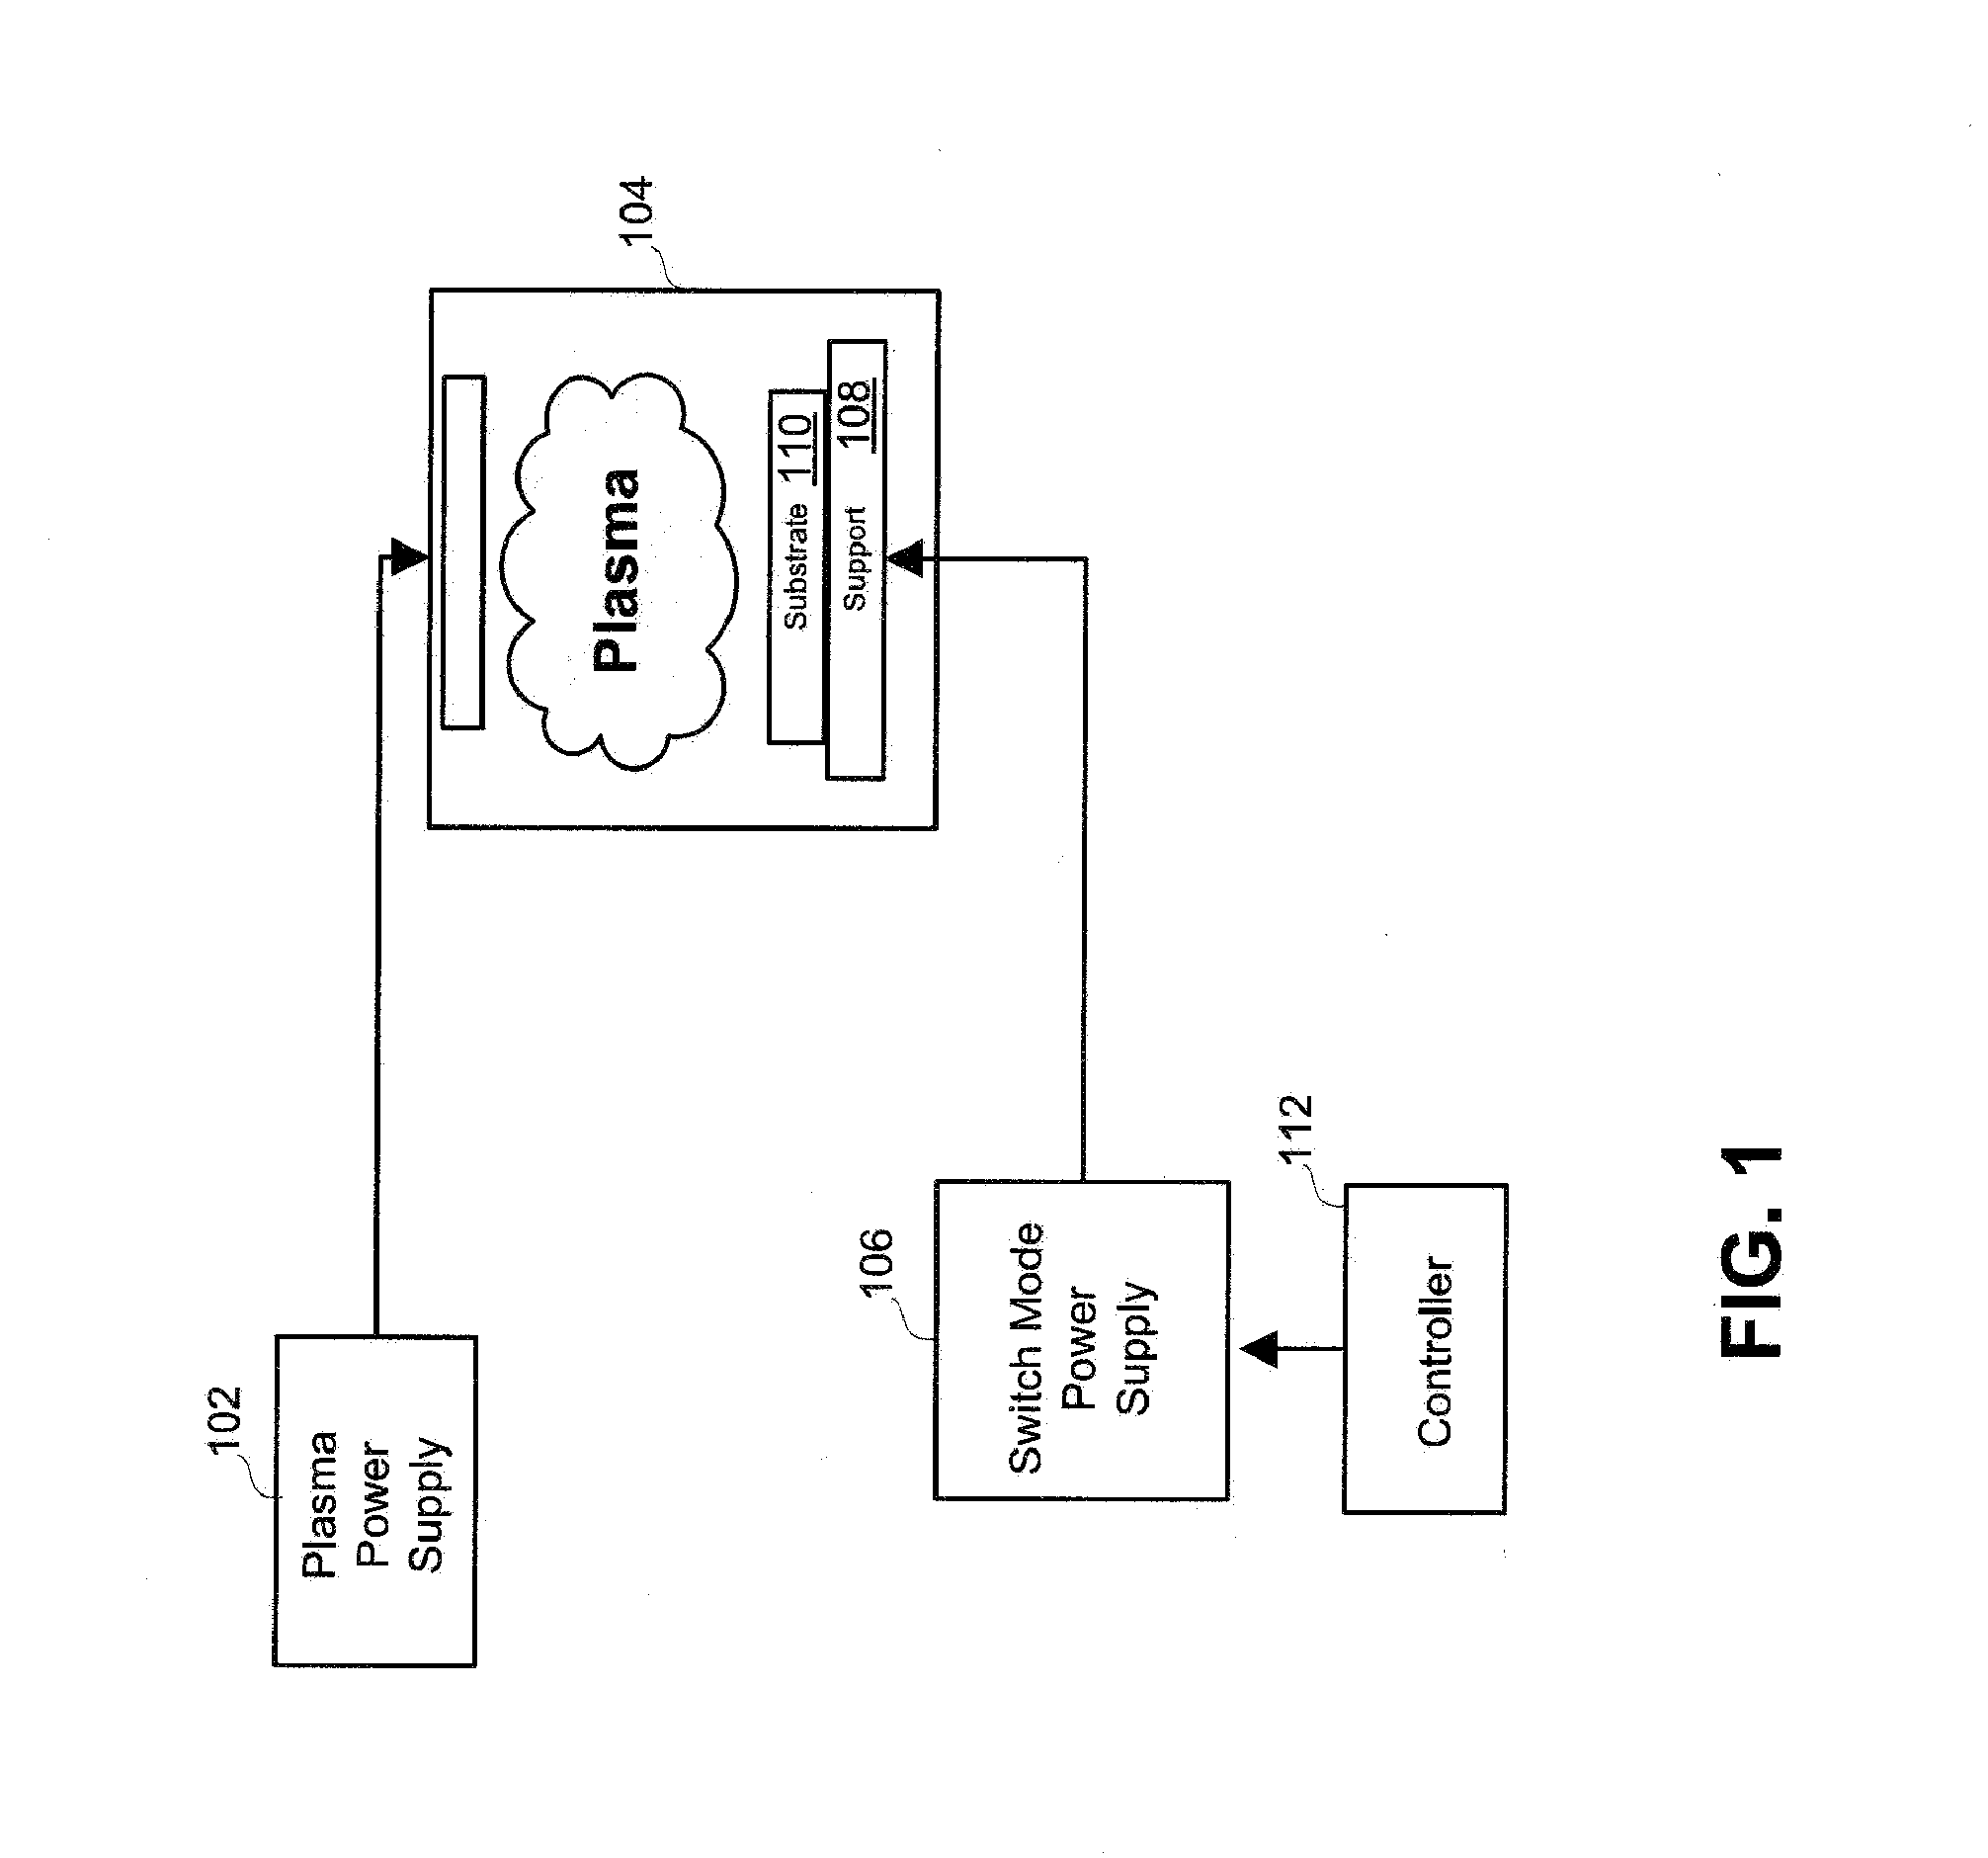 Wafer Chucking System for Advanced Plasma Ion Energy Processing Systems